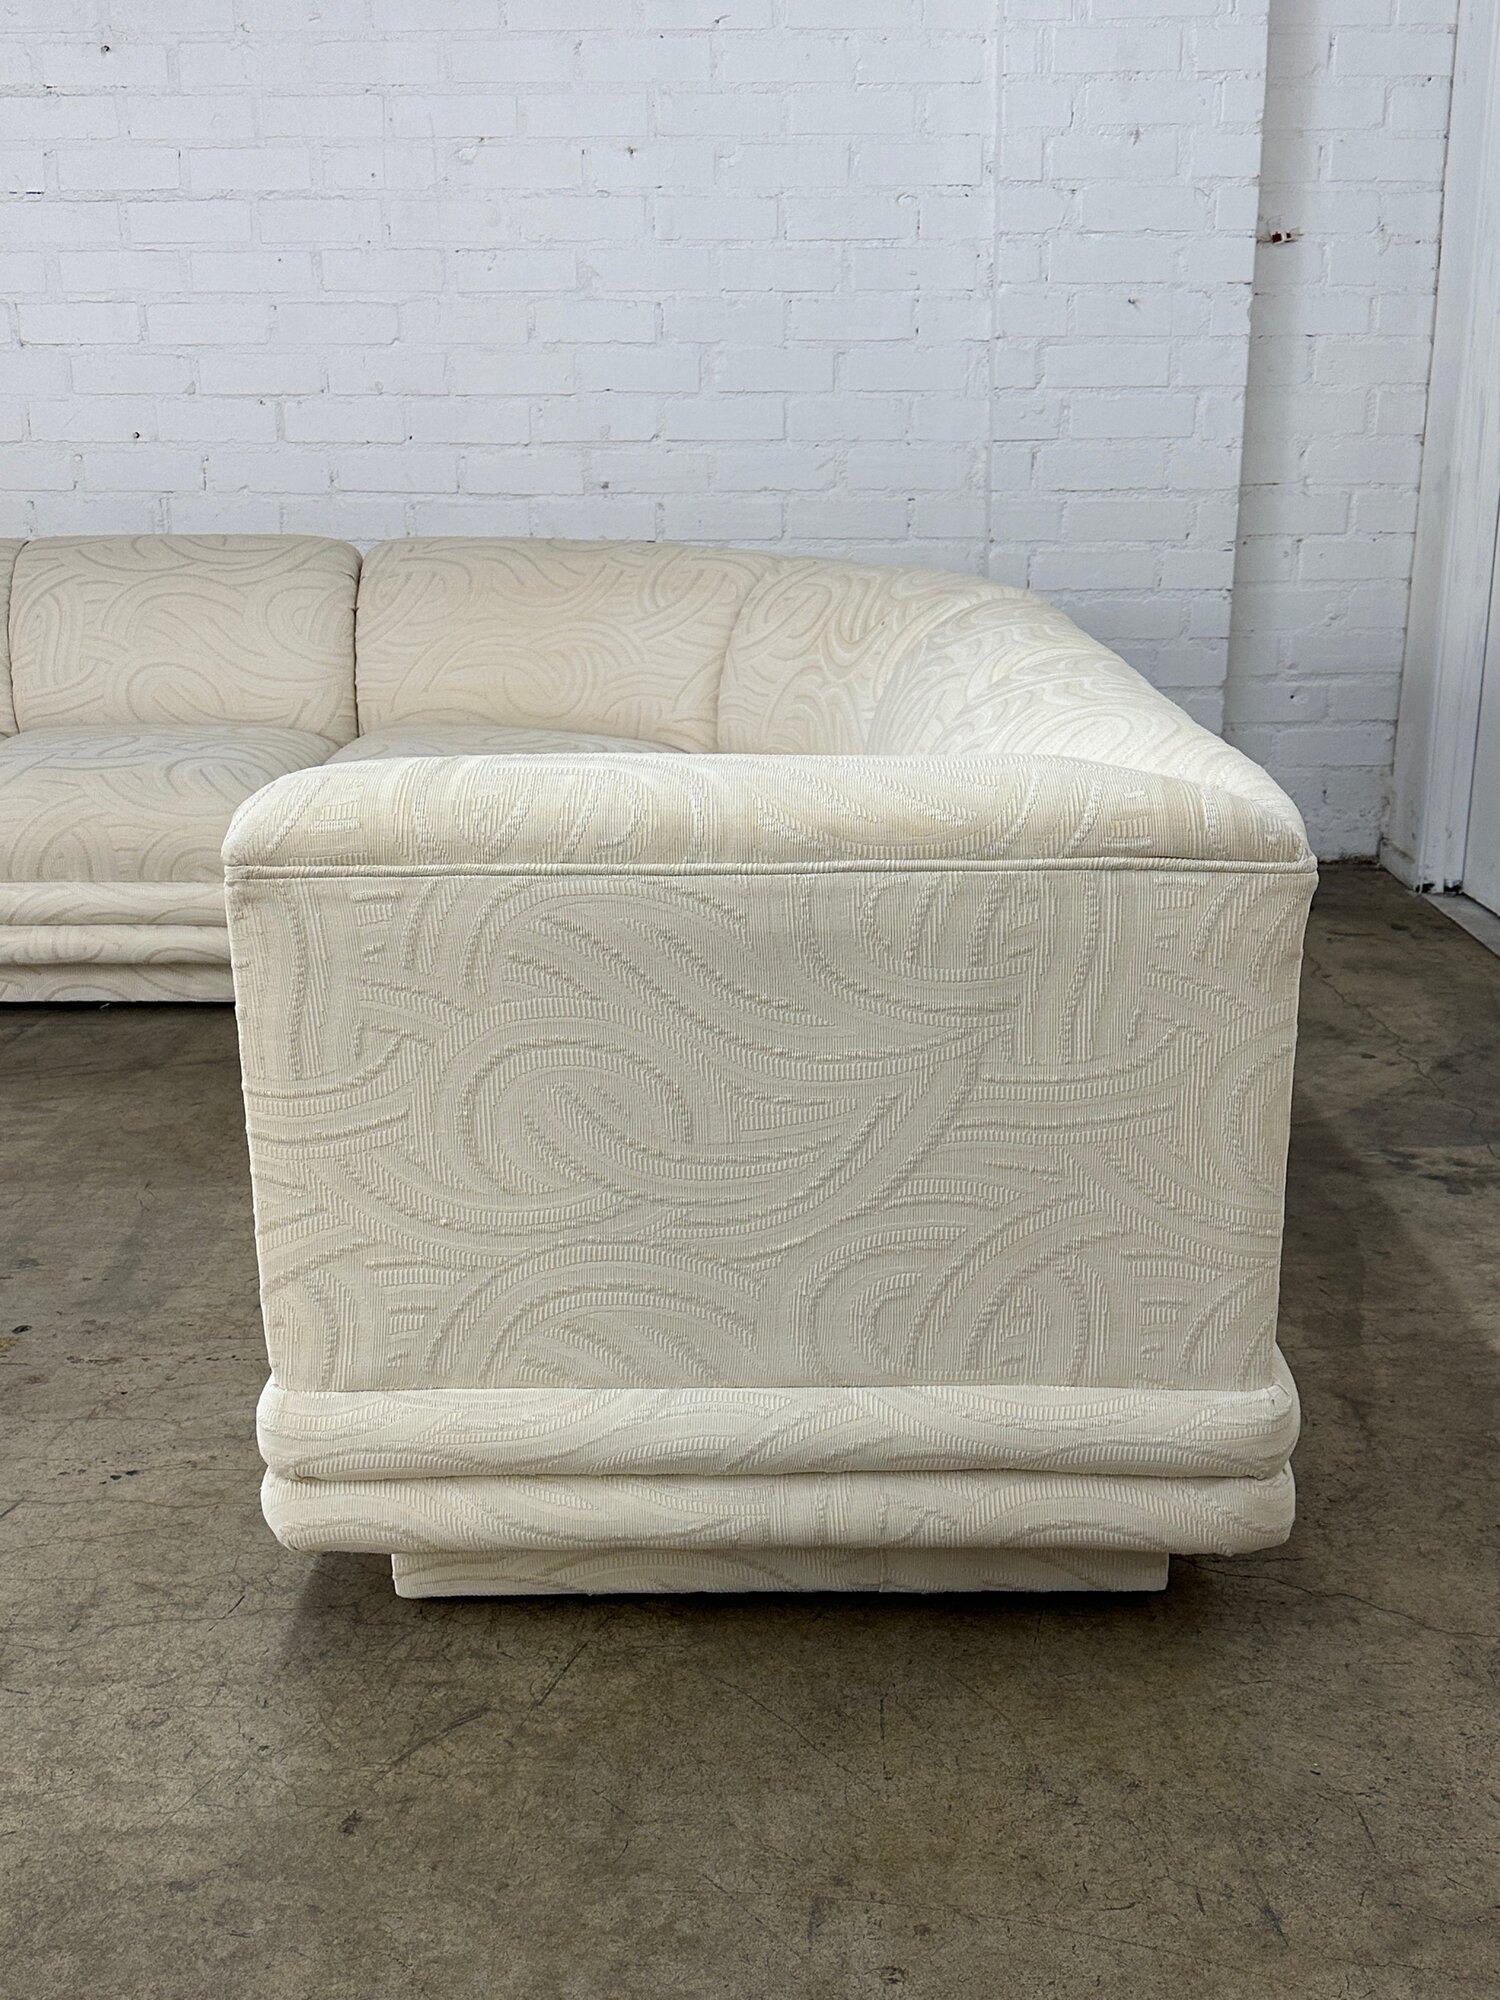 W135 D100 H30 SW172 SD22 SH17

Post modern Ribbed 3 piece sectional in good vintage condition. Item has original fabric with very light wear and minimal stains. Foam is in good condition. 

Email us for upholstery quotes.